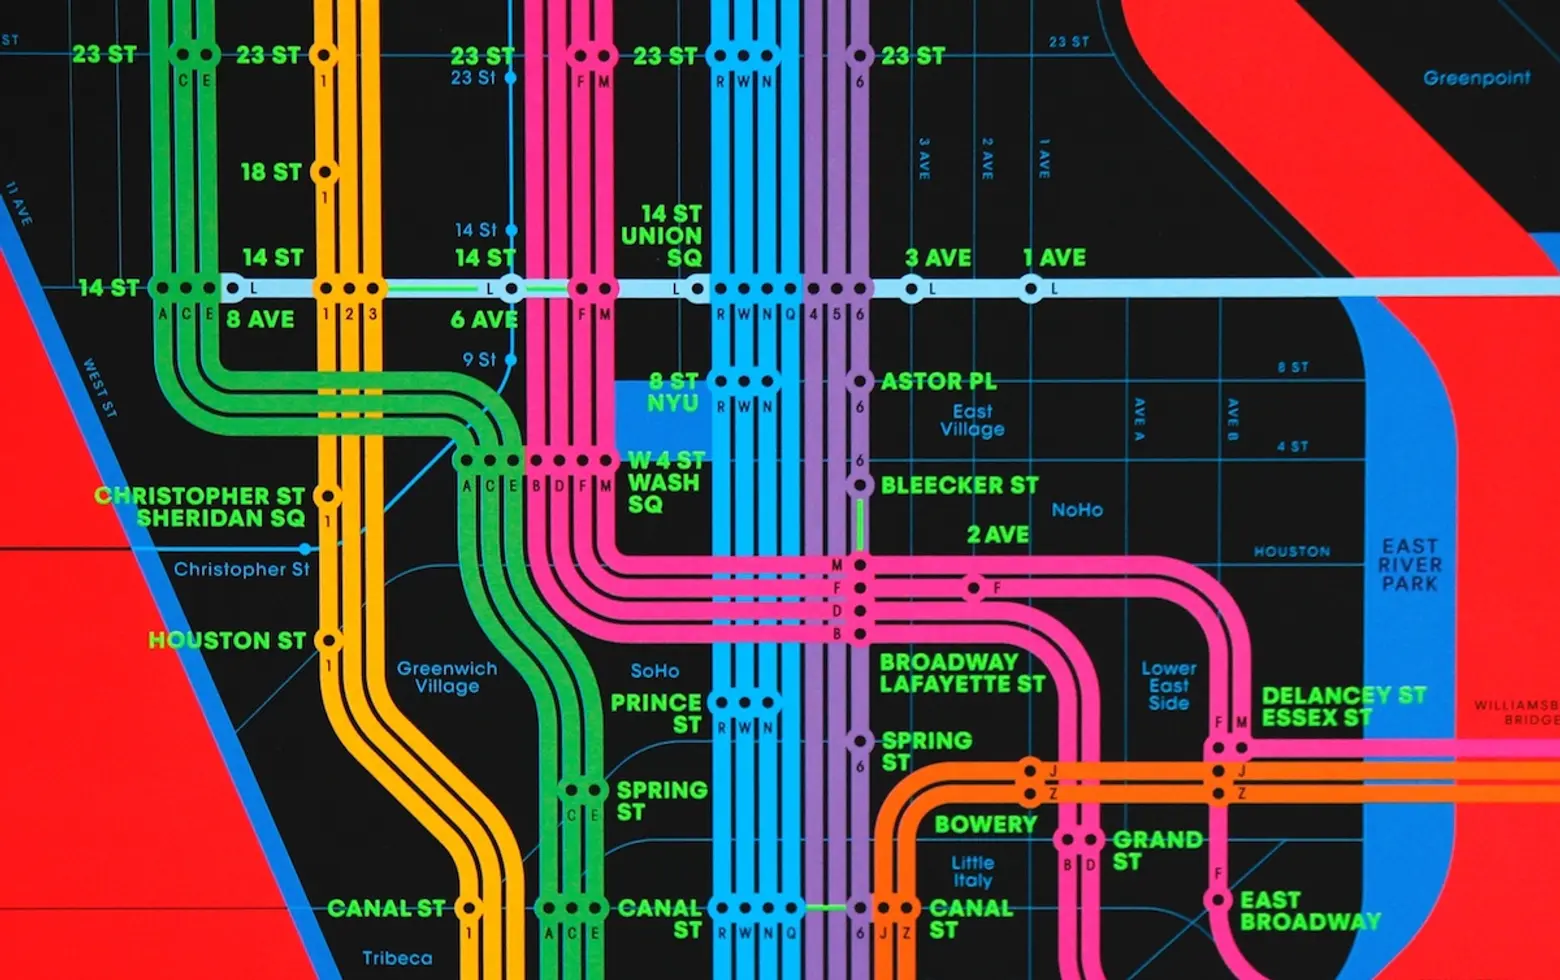 DAVID HEASTY, ONE COLOR SUBWAY MAP, STEFANIE WEIGLER, TRIBORO, WRONG COLOR SUBWAY MAP